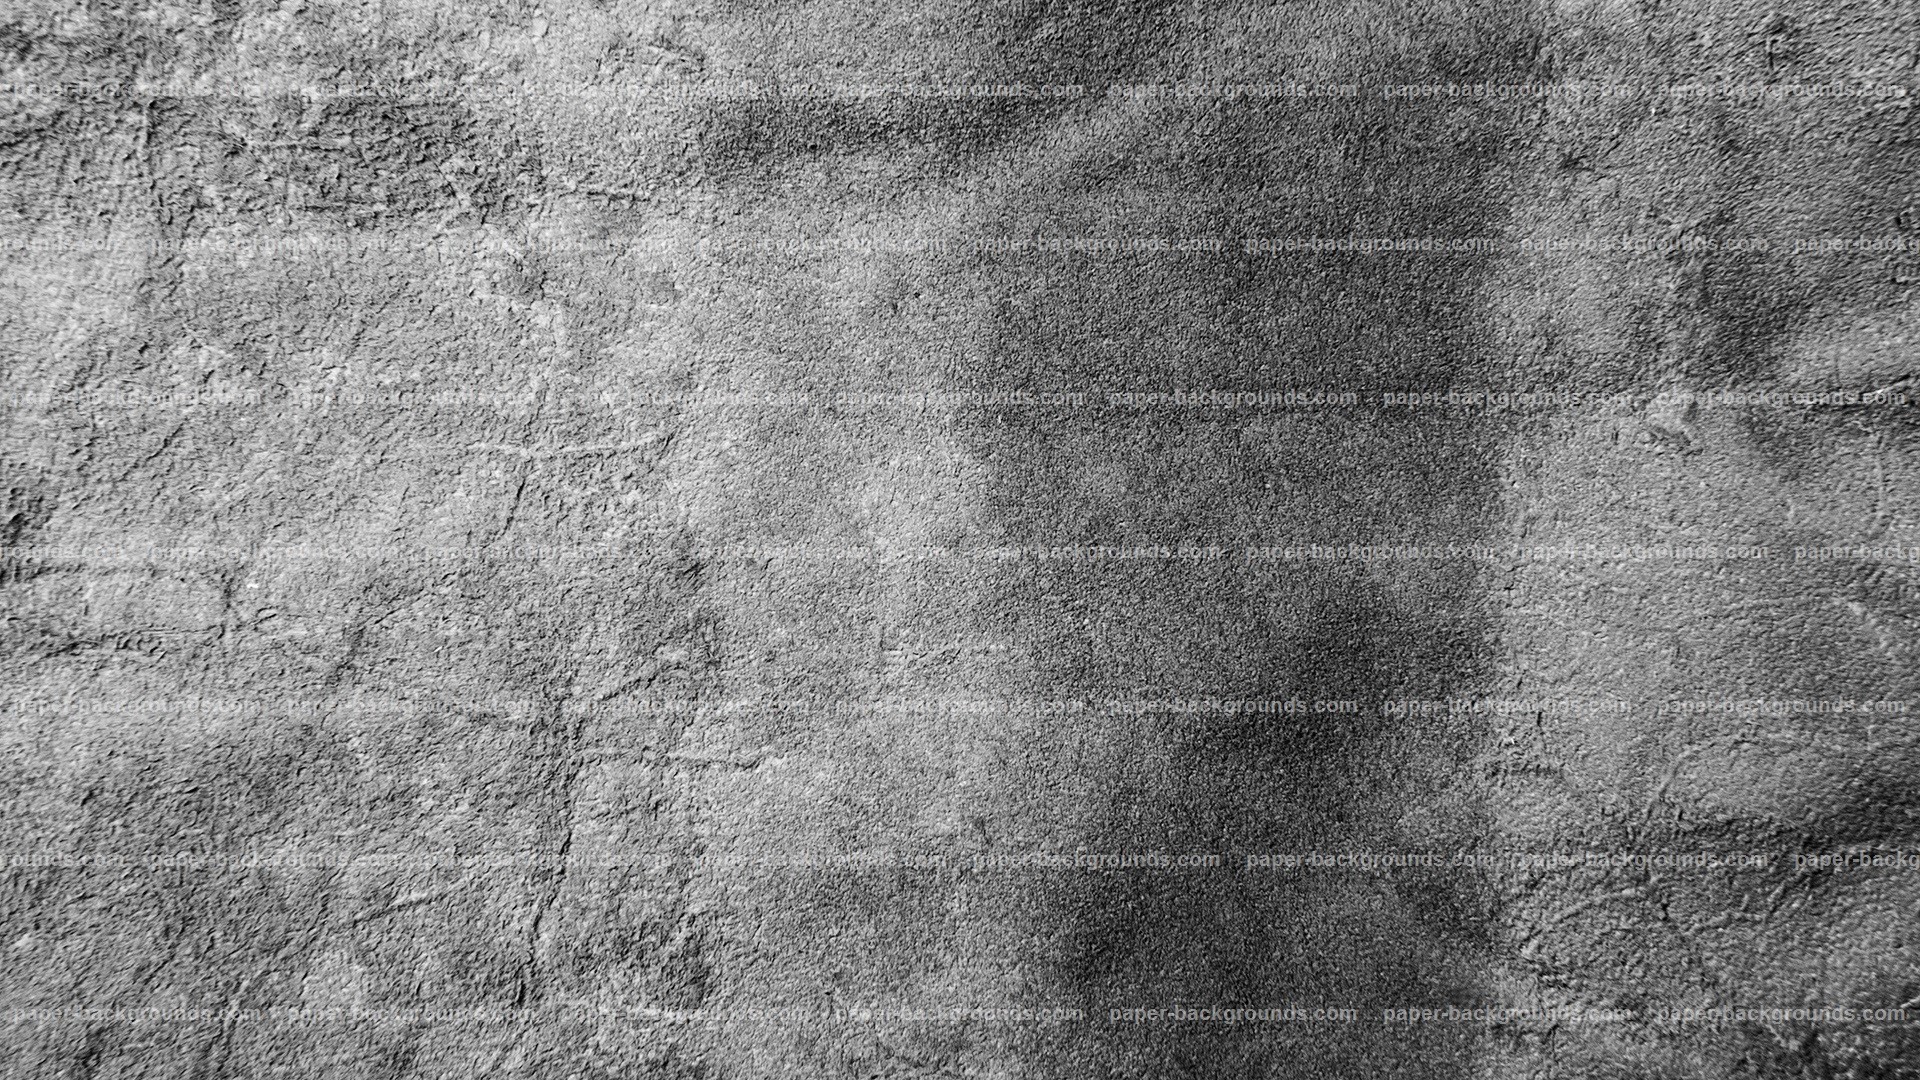 Paper Backgrounds - Grey Background High Resolution - HD Wallpaper 